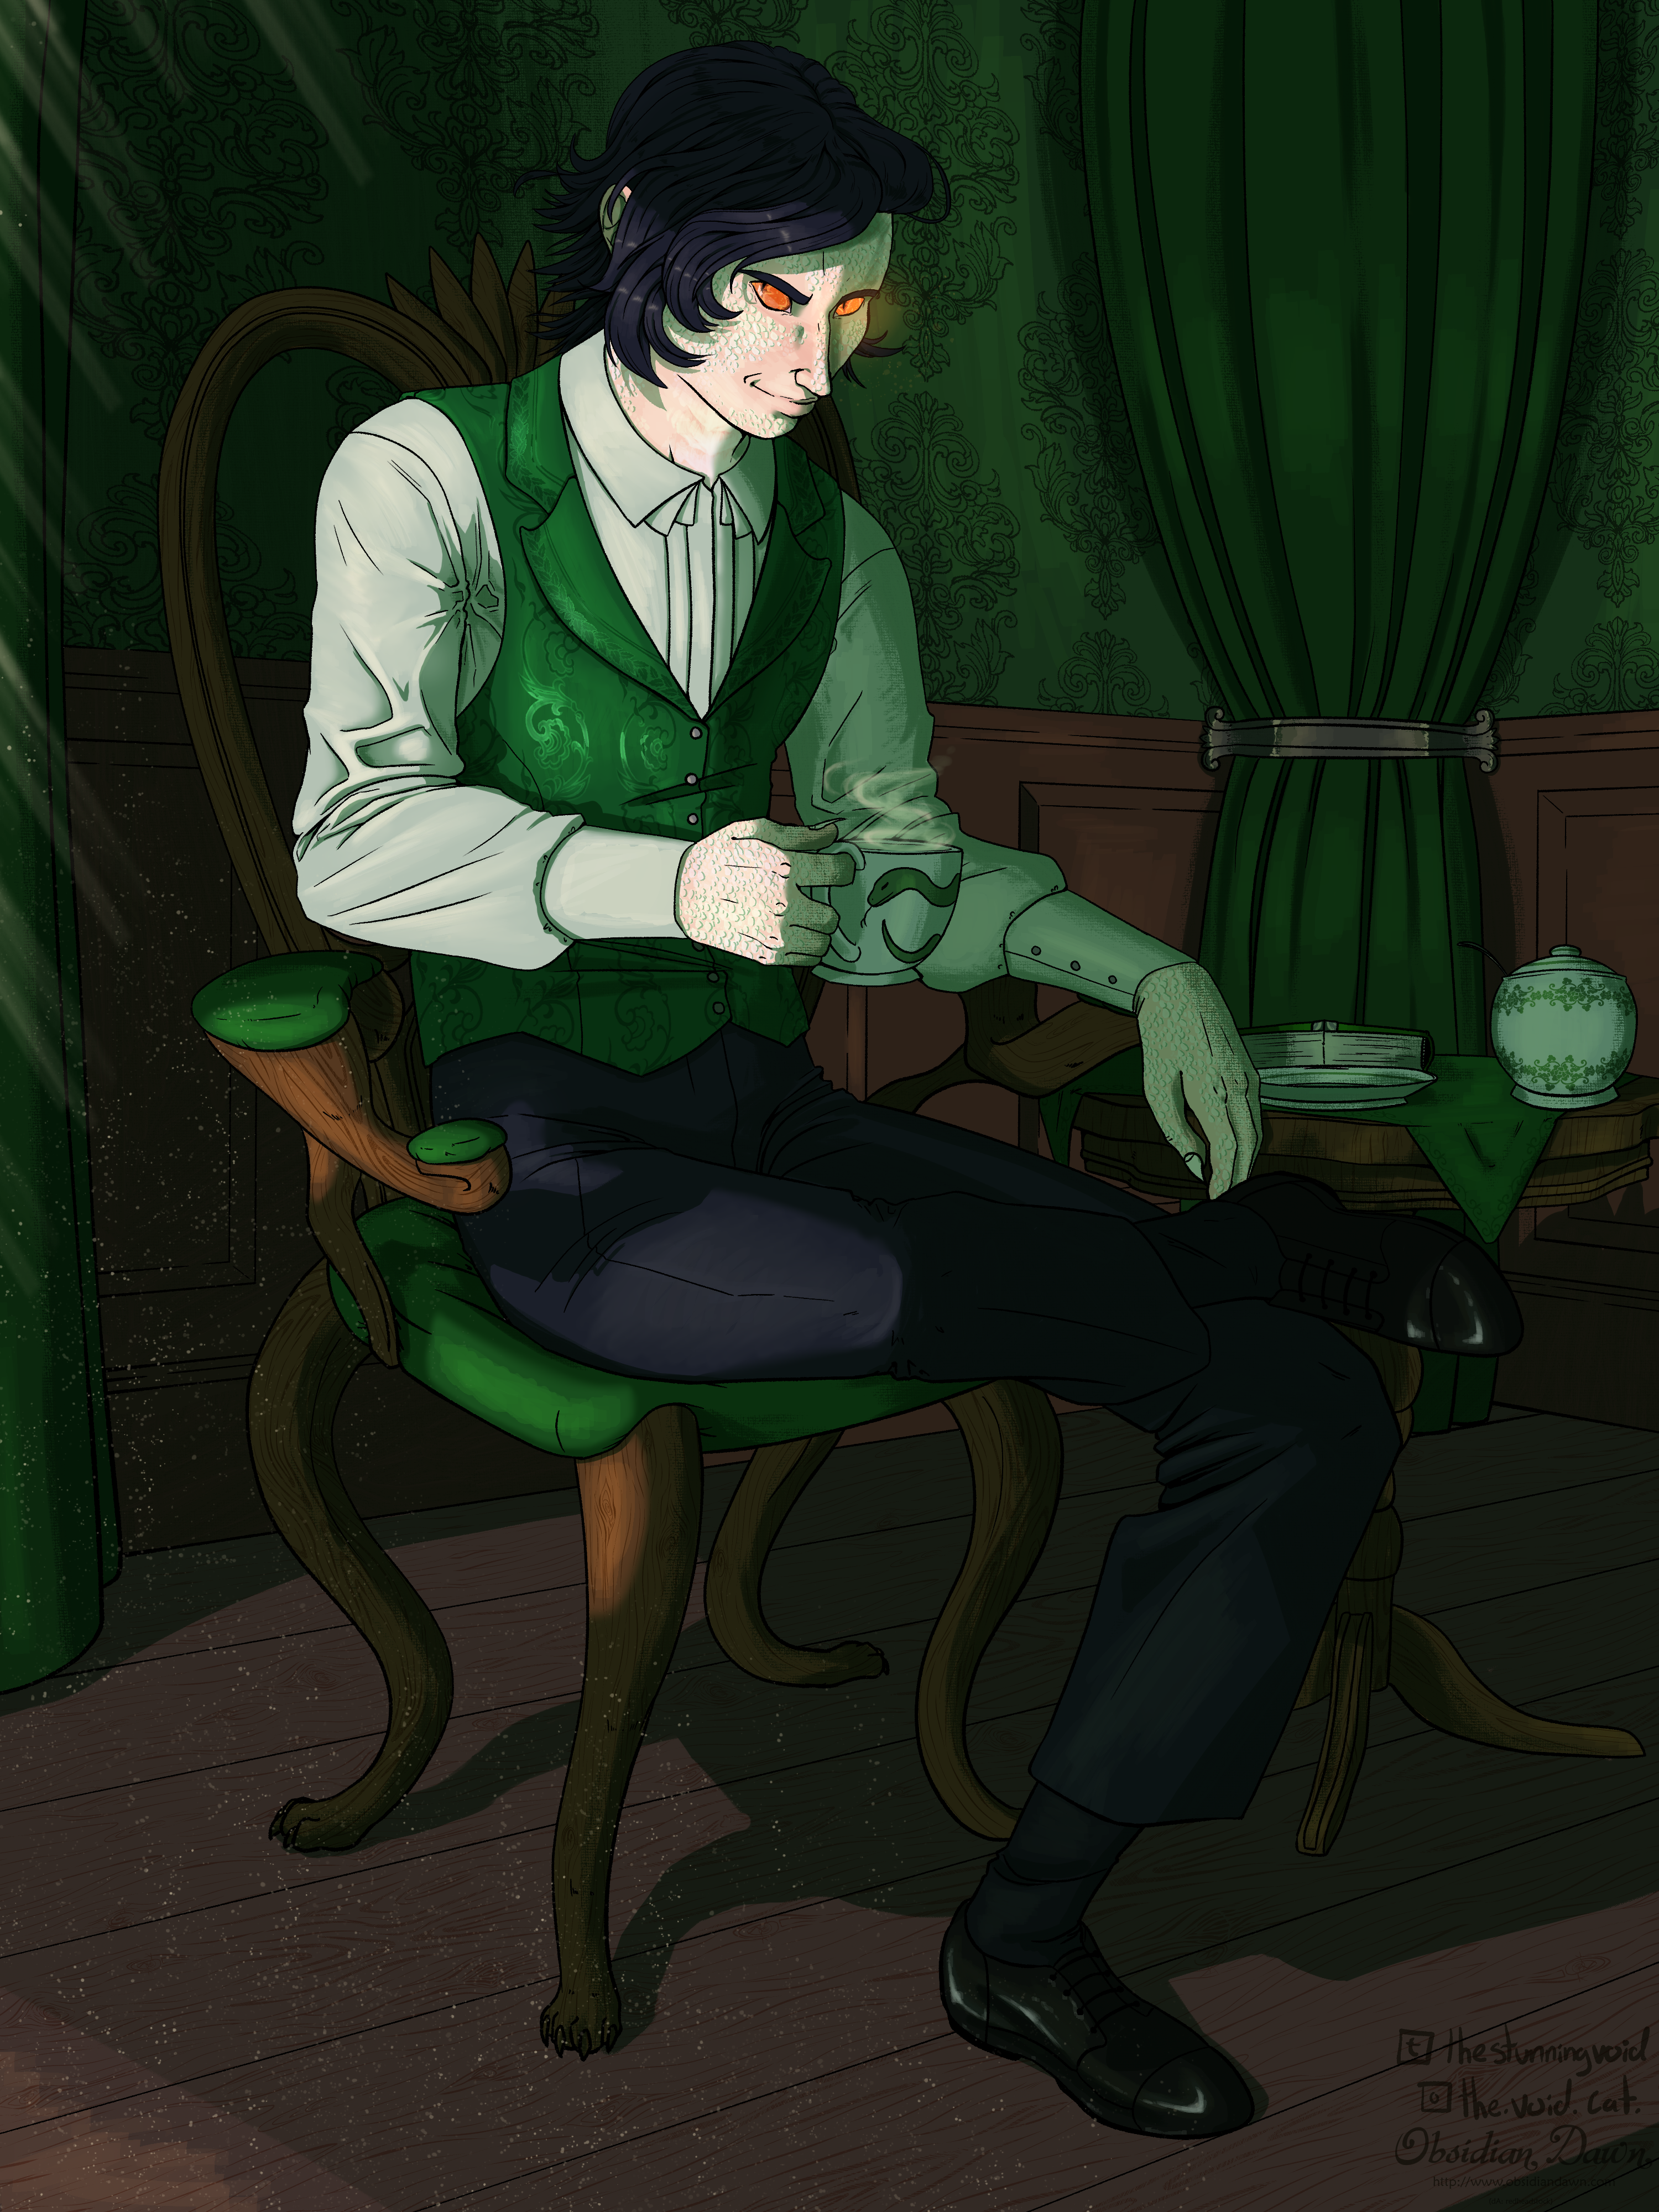 A drawing of Kasiir, a Yuan-ti with white, glimmering scales, pale skin, and black hair. He has orange eyes with slit pupils. He's wearing a green vest with leafy patterning, a white dress shirt, and black dress pants with shiny black leather shoes. In one hand, he holds a staming cup of tea. The cup has a small snake design on it. Kasiir is sitting in a curvy wooden chair with a green seat cushion, and on a small decorative table next to him, there is a tea plate, a bowl of sugar, and a book. The room he's sitting in is mostly dark with thick green curtains, green patterned wallpaper, and dark wooden baseboarding all around. There is a light source shining somewhere out of frame, and it catches Kasiir at a sharp angle, accentuating his face and torso. He's smiling sinisterly.